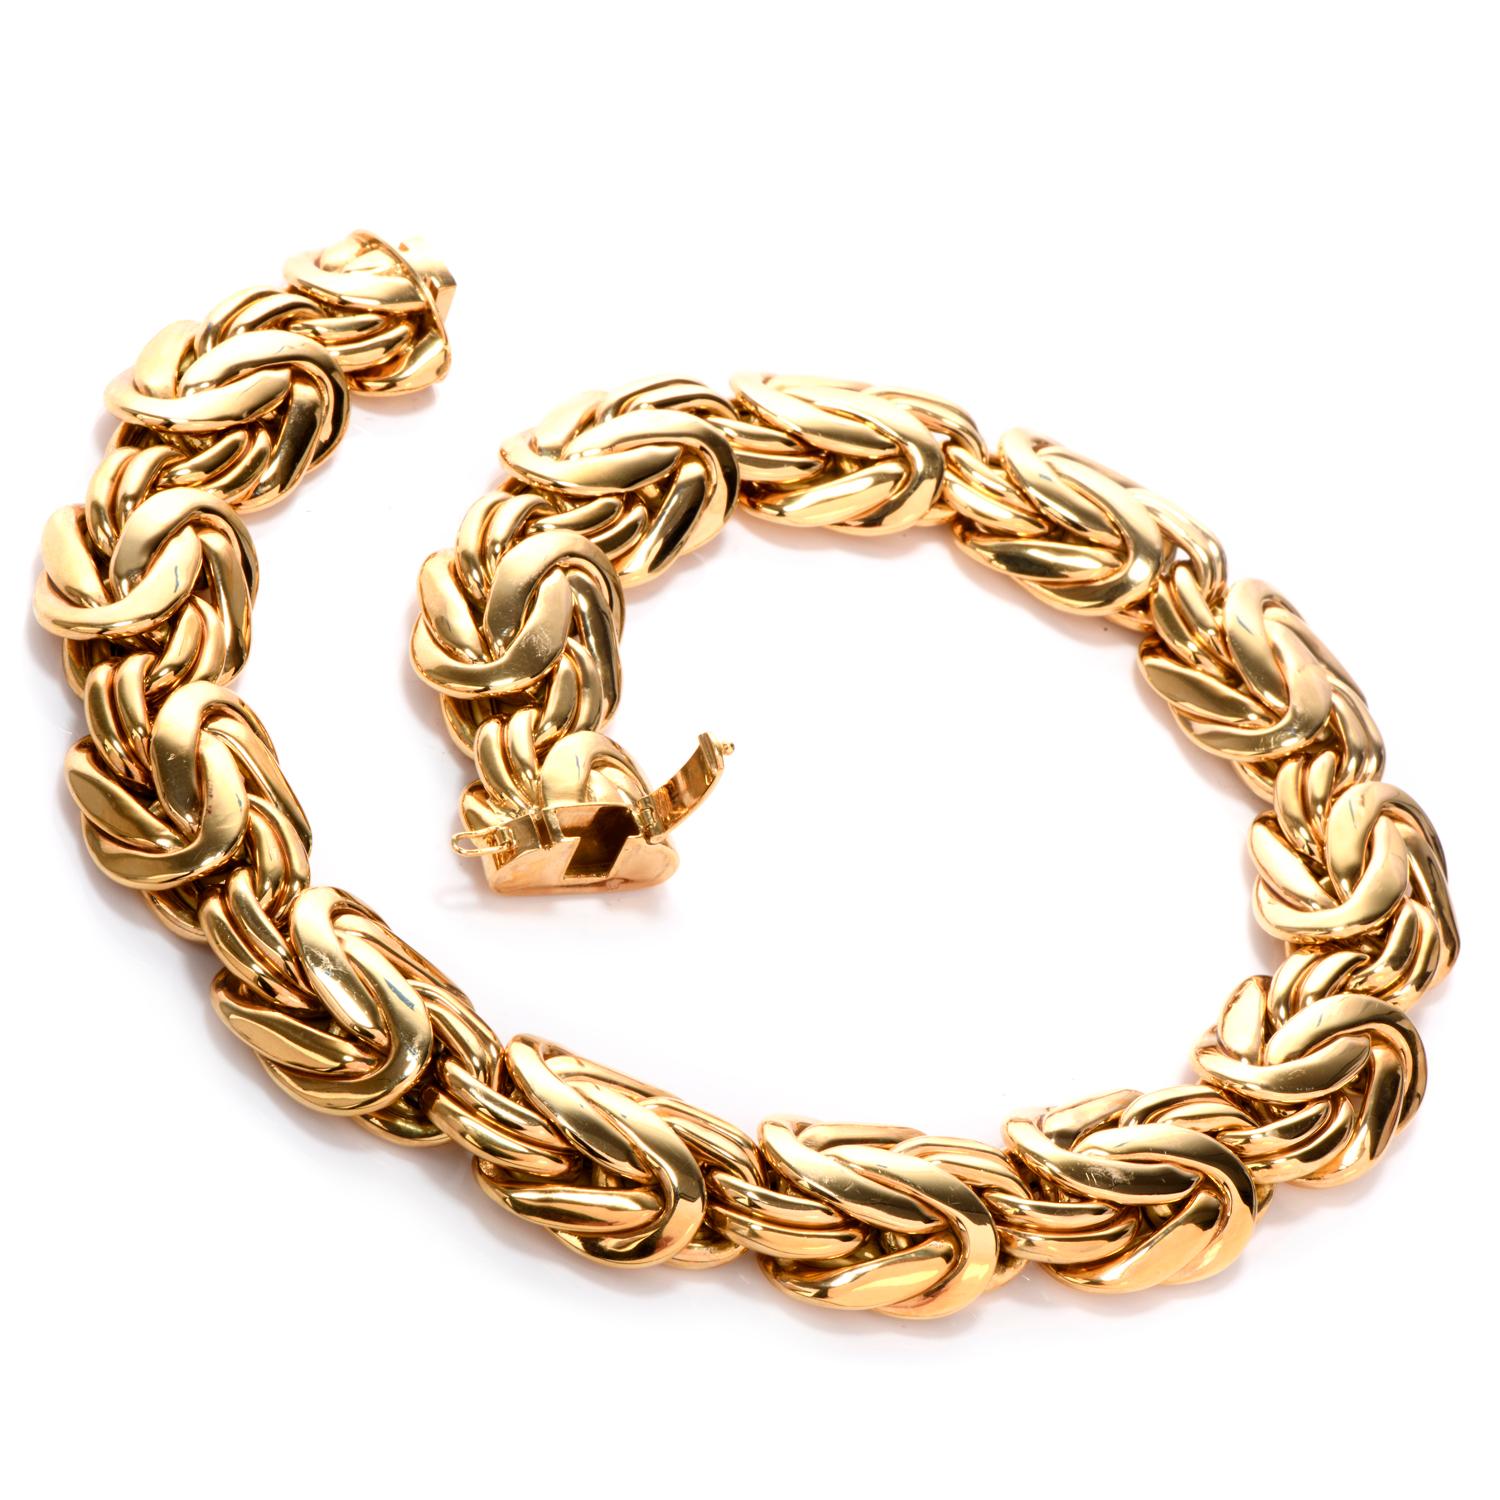 18k yellow solid gold mens cuban link chain 7 mm yellow gold / 18.0 inches - 85.9 grams